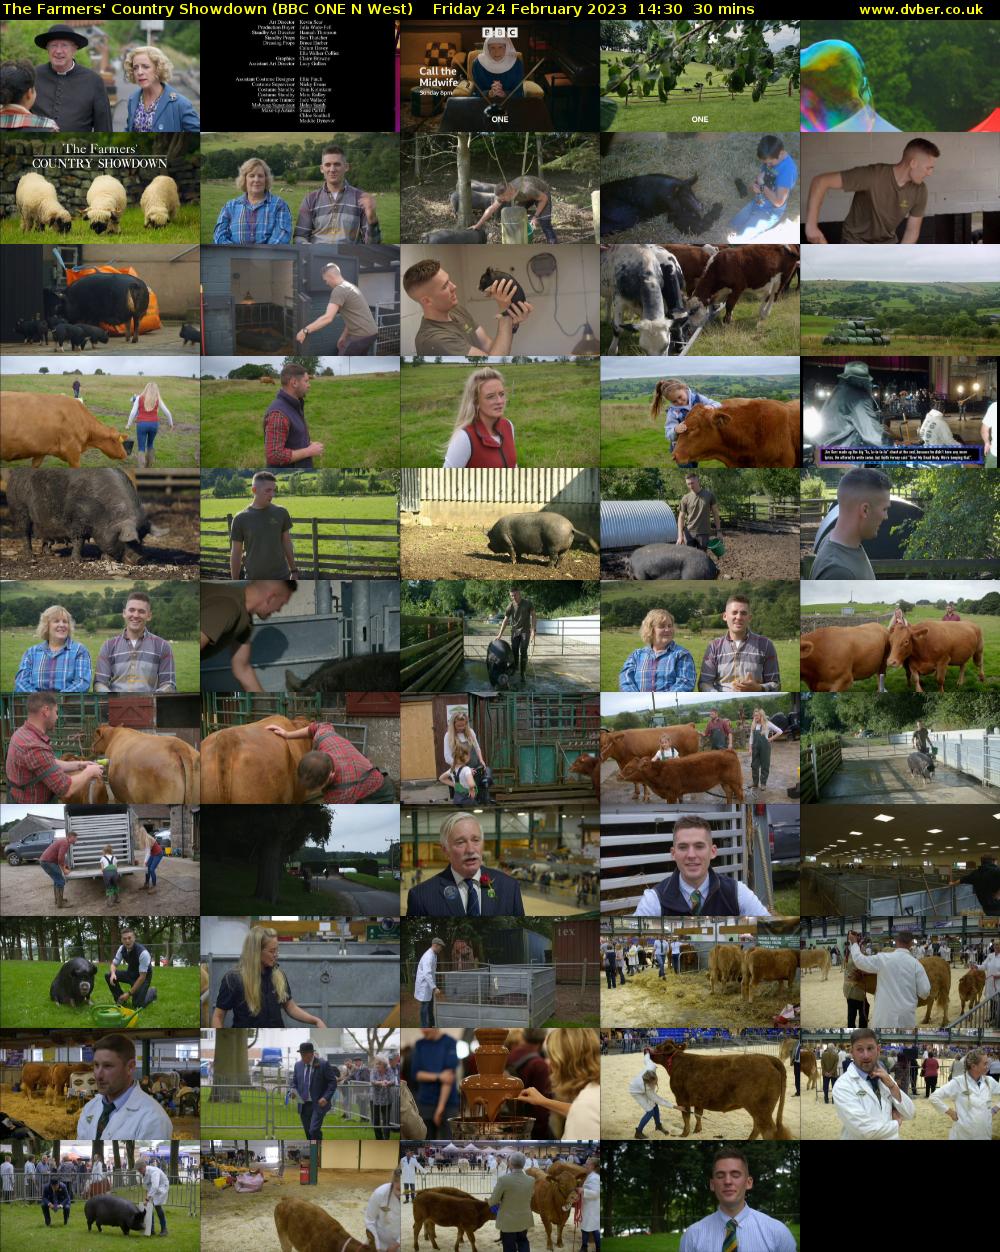 The Farmers' Country Showdown (BBC ONE N West) Friday 24 February 2023 14:30 - 15:00